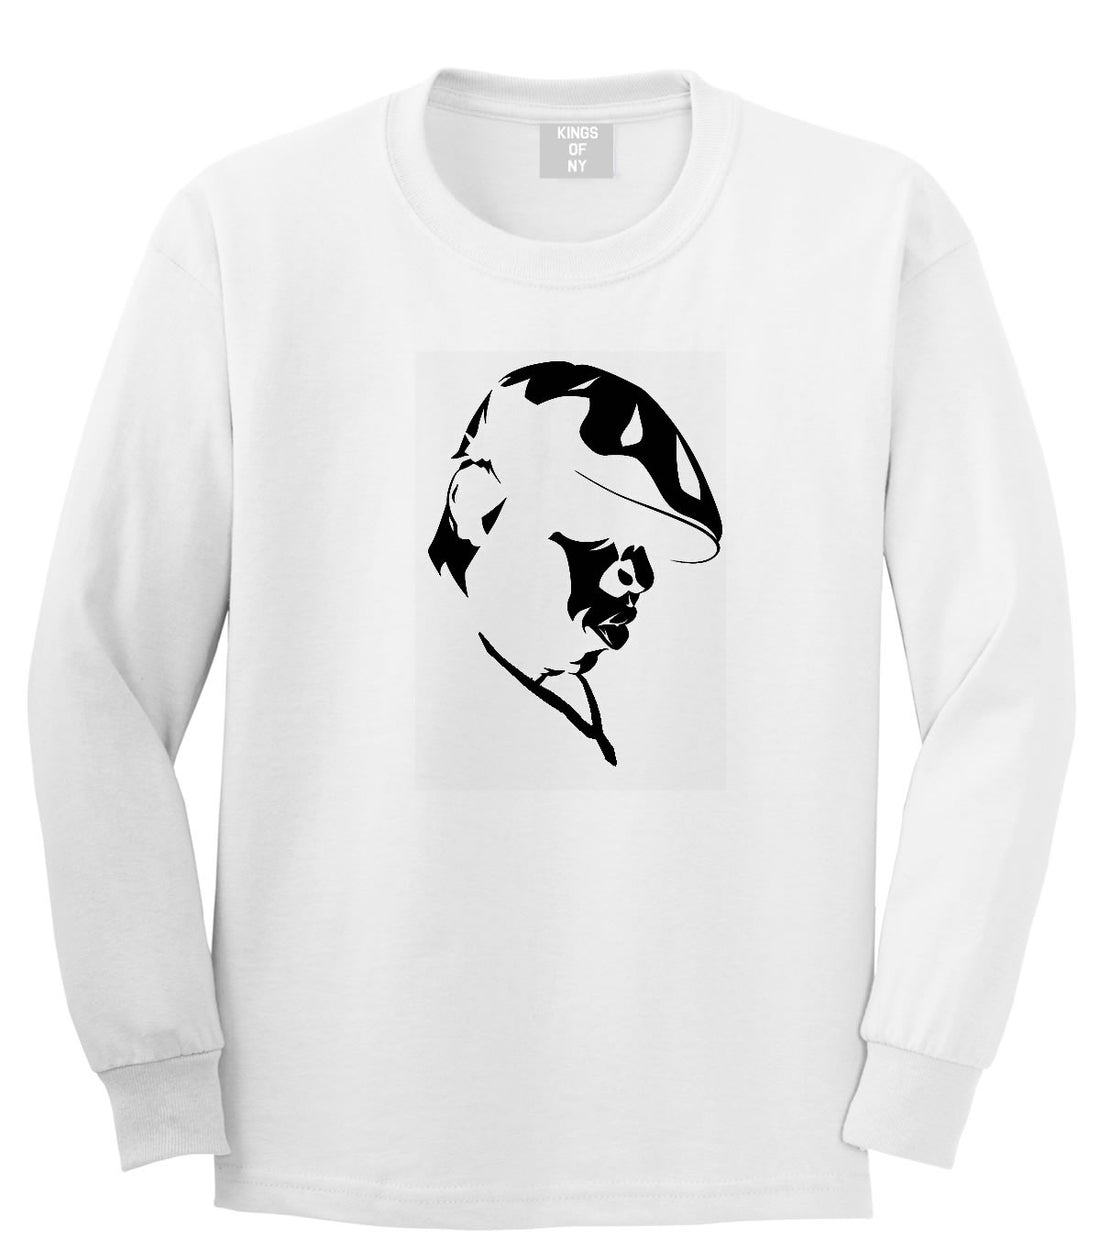  Kings Of NY Biggie Silhouette BIG Long Sleeve T-Shirt in White